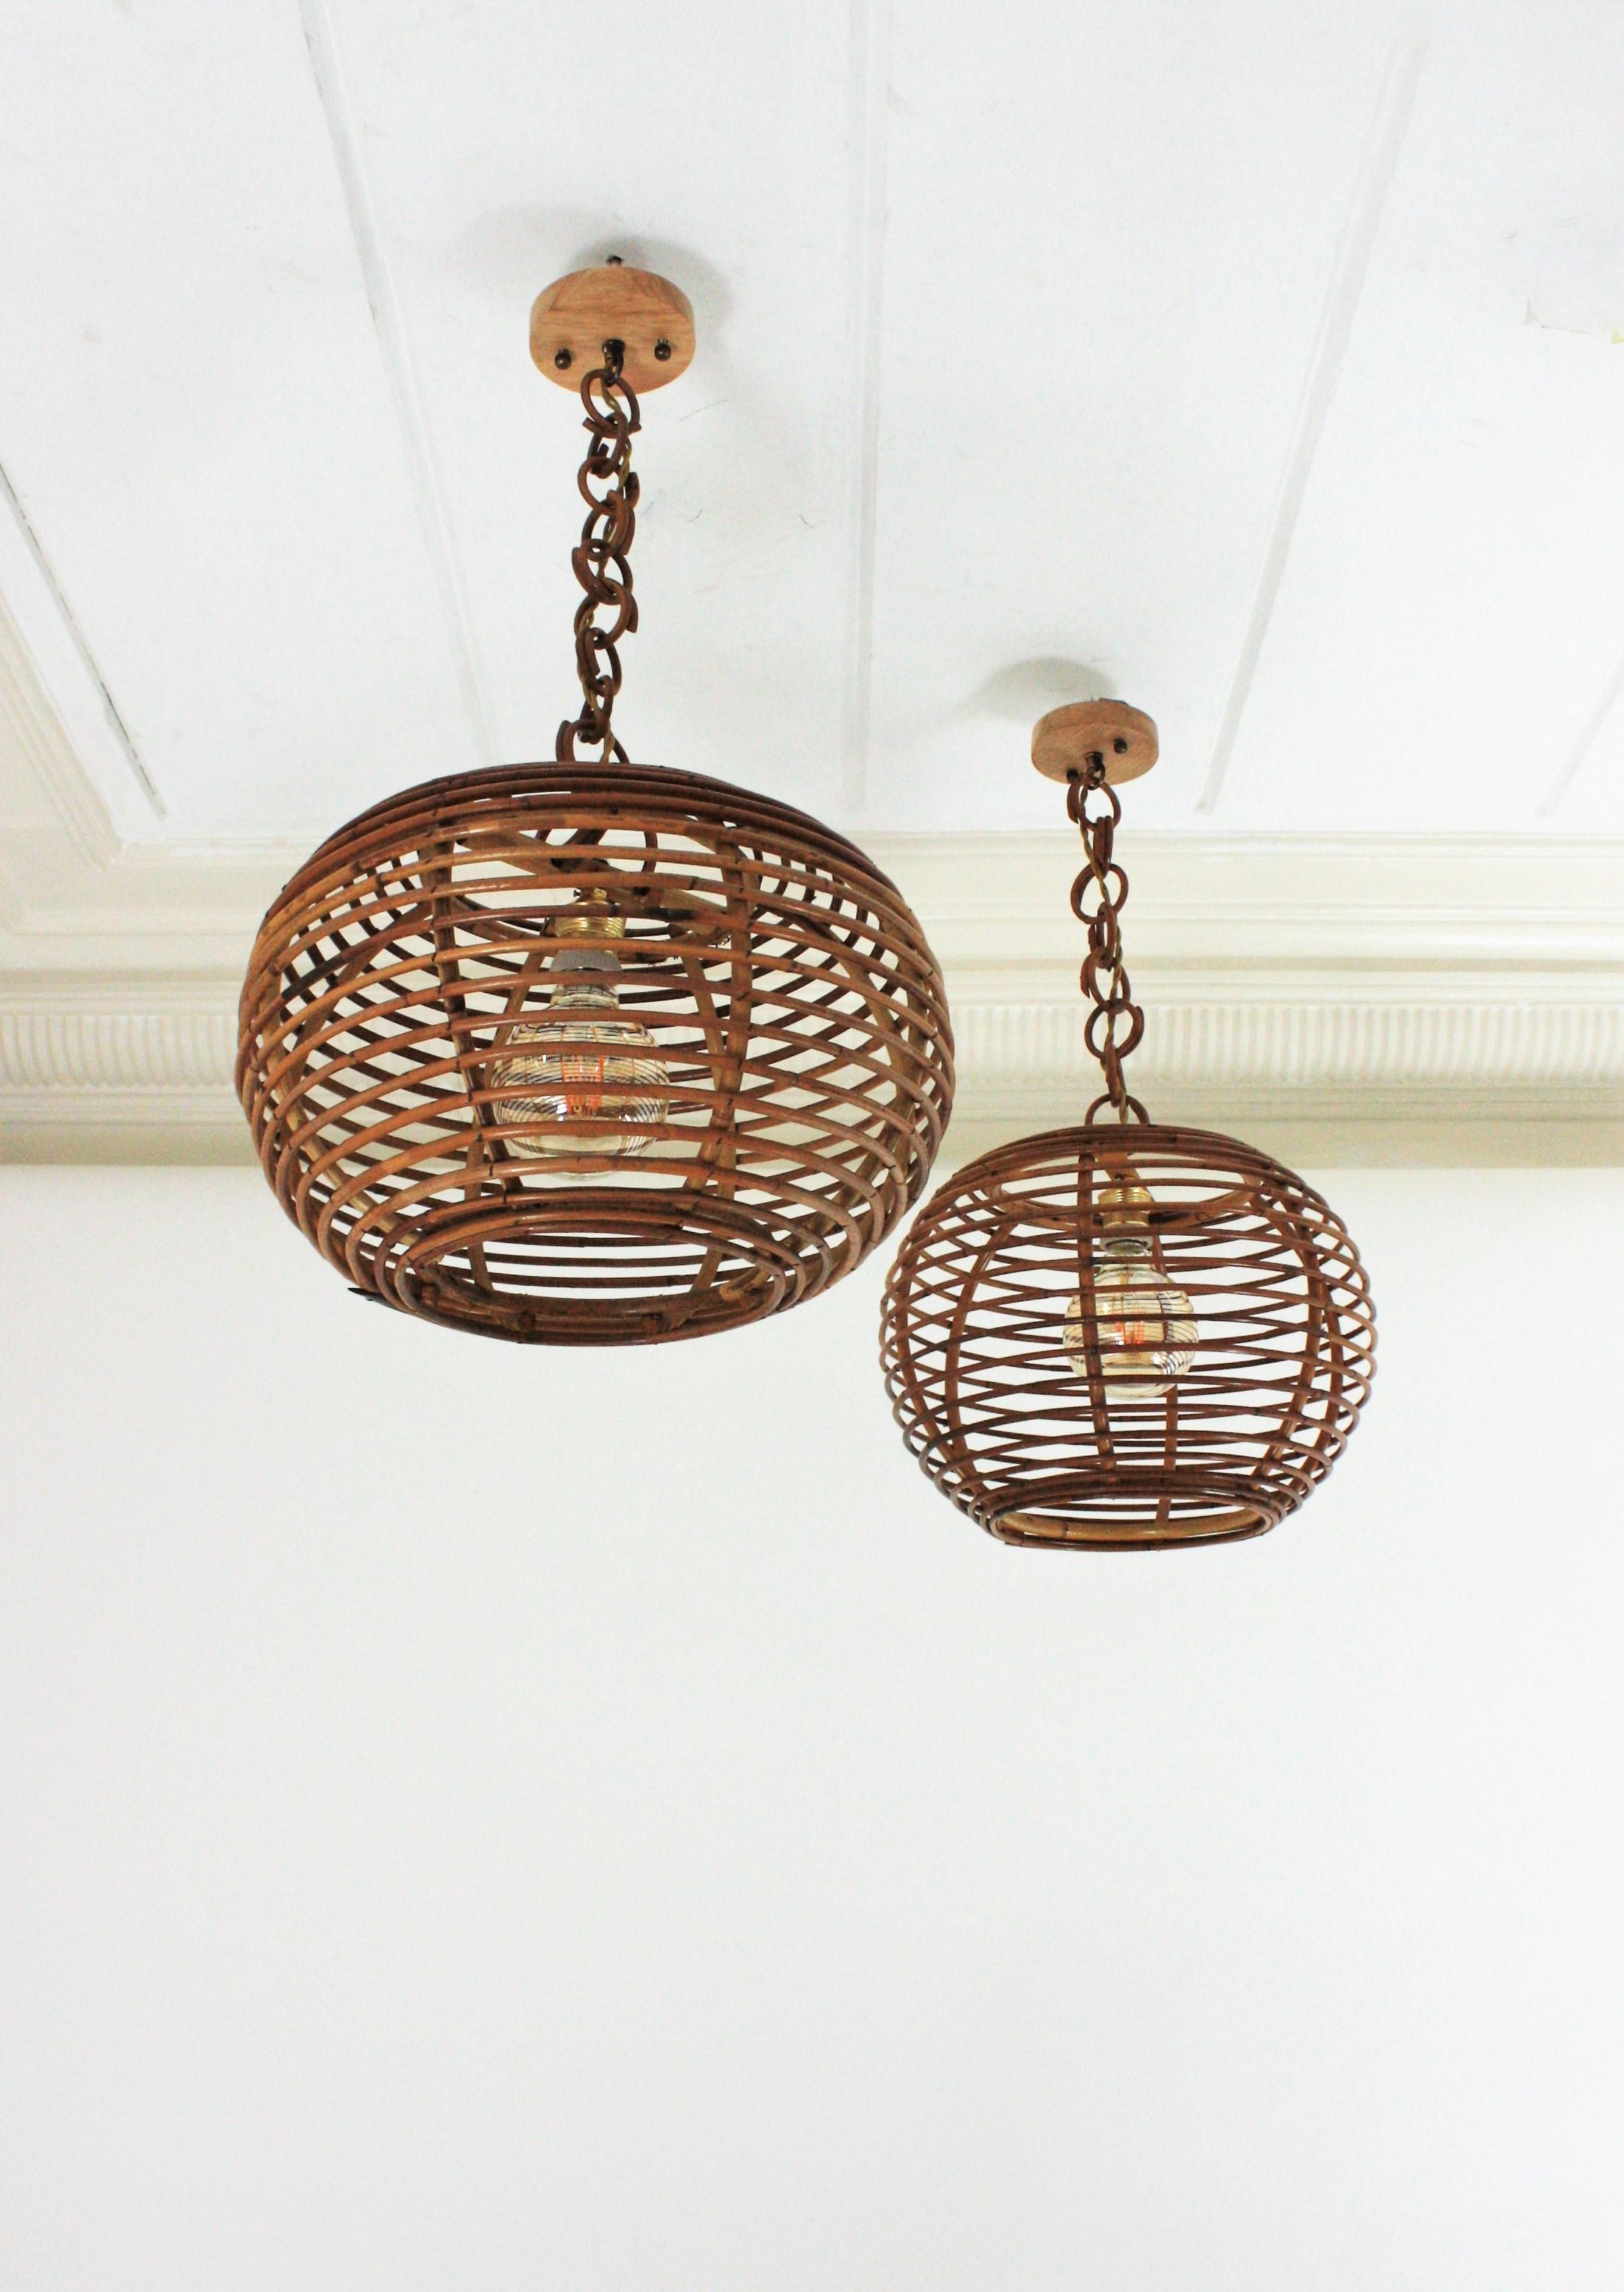 Bamboo Pair of Rattan Globe Pendants or Hanging Lights, 1950s For Sale